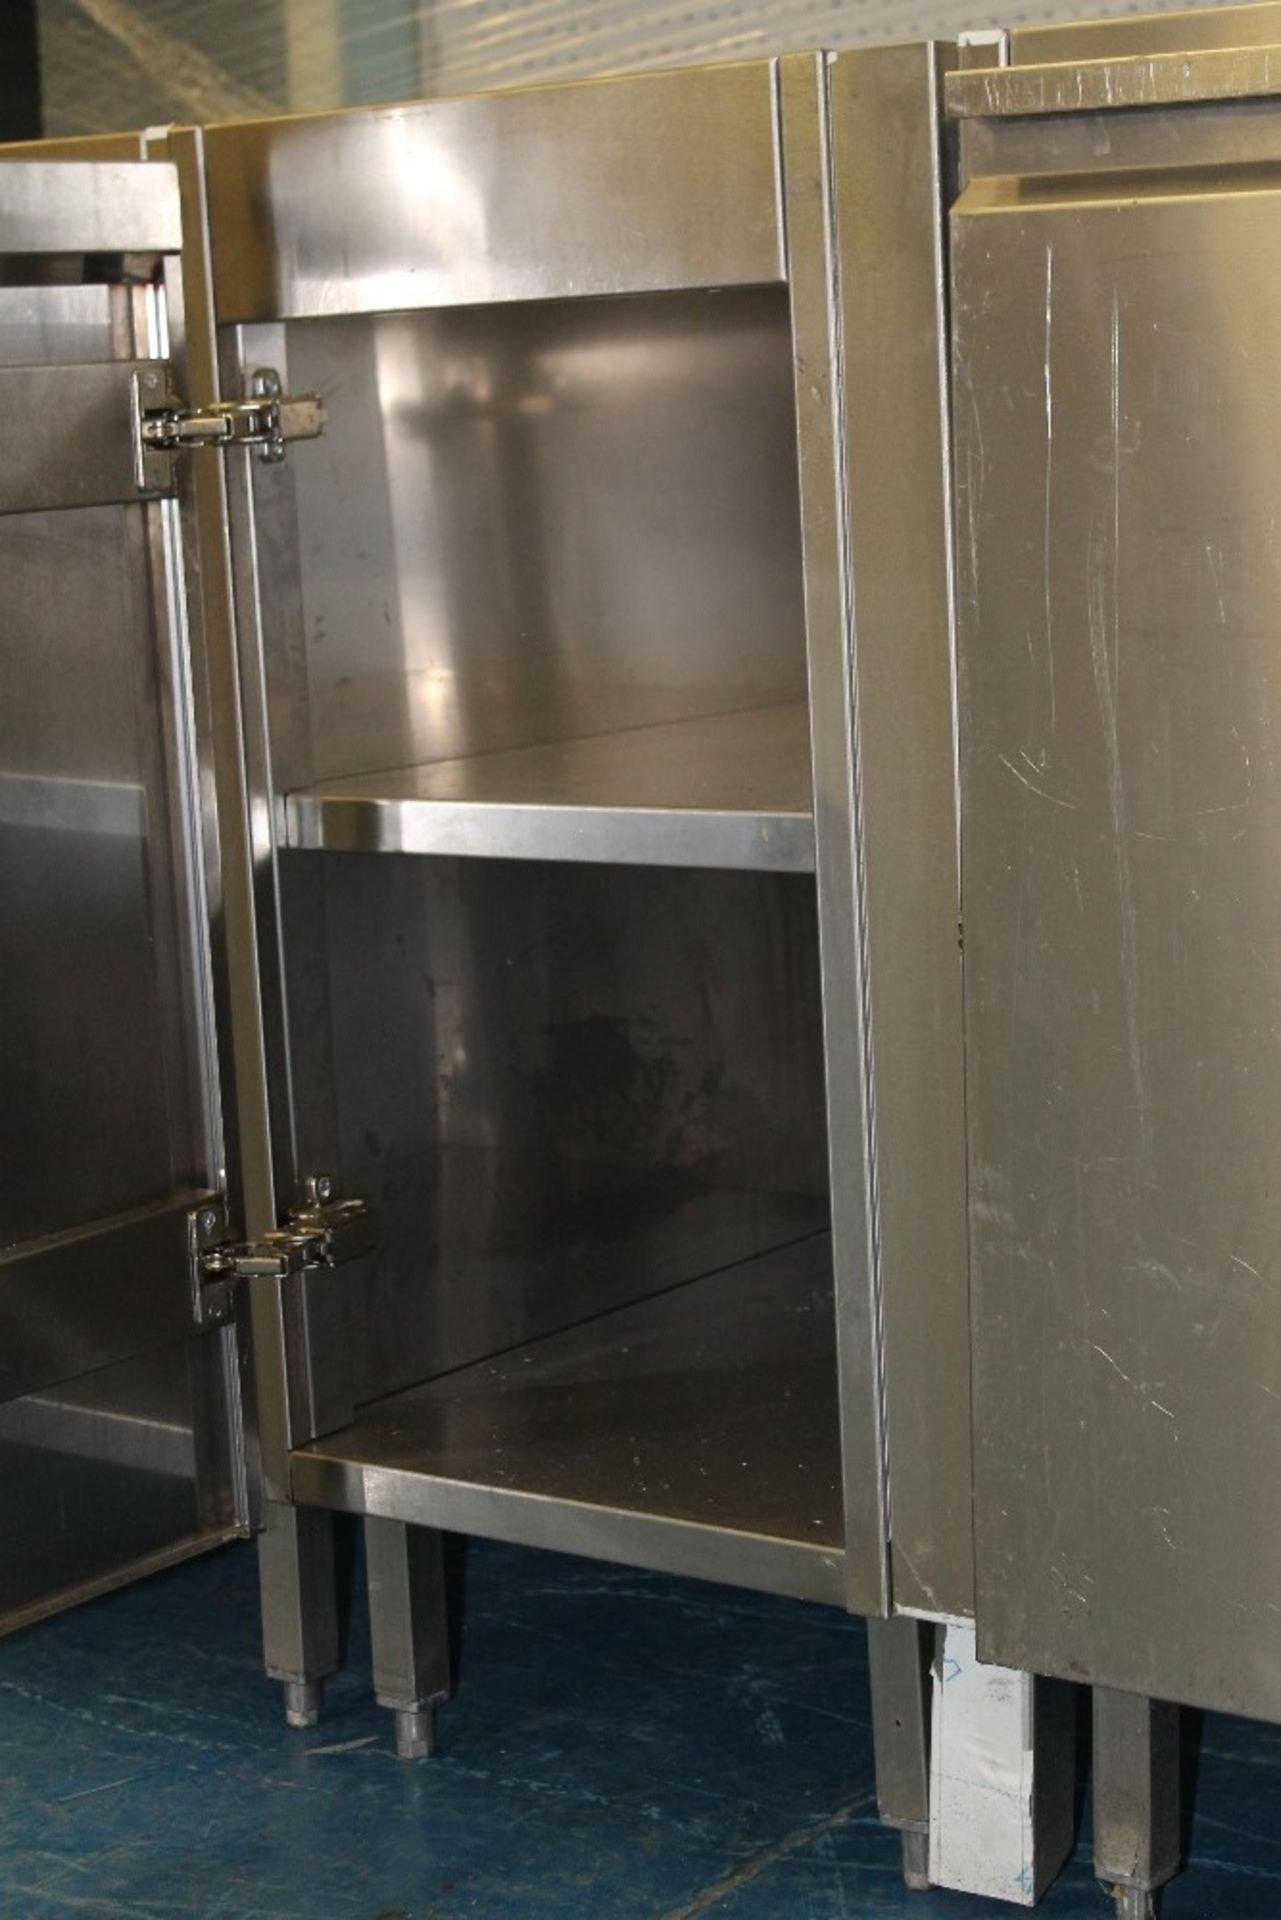 Stainless Steel Catering Cupboard with 1 Shelf – NO VAT W40cm x H88cm x D60cm - Image 2 of 2